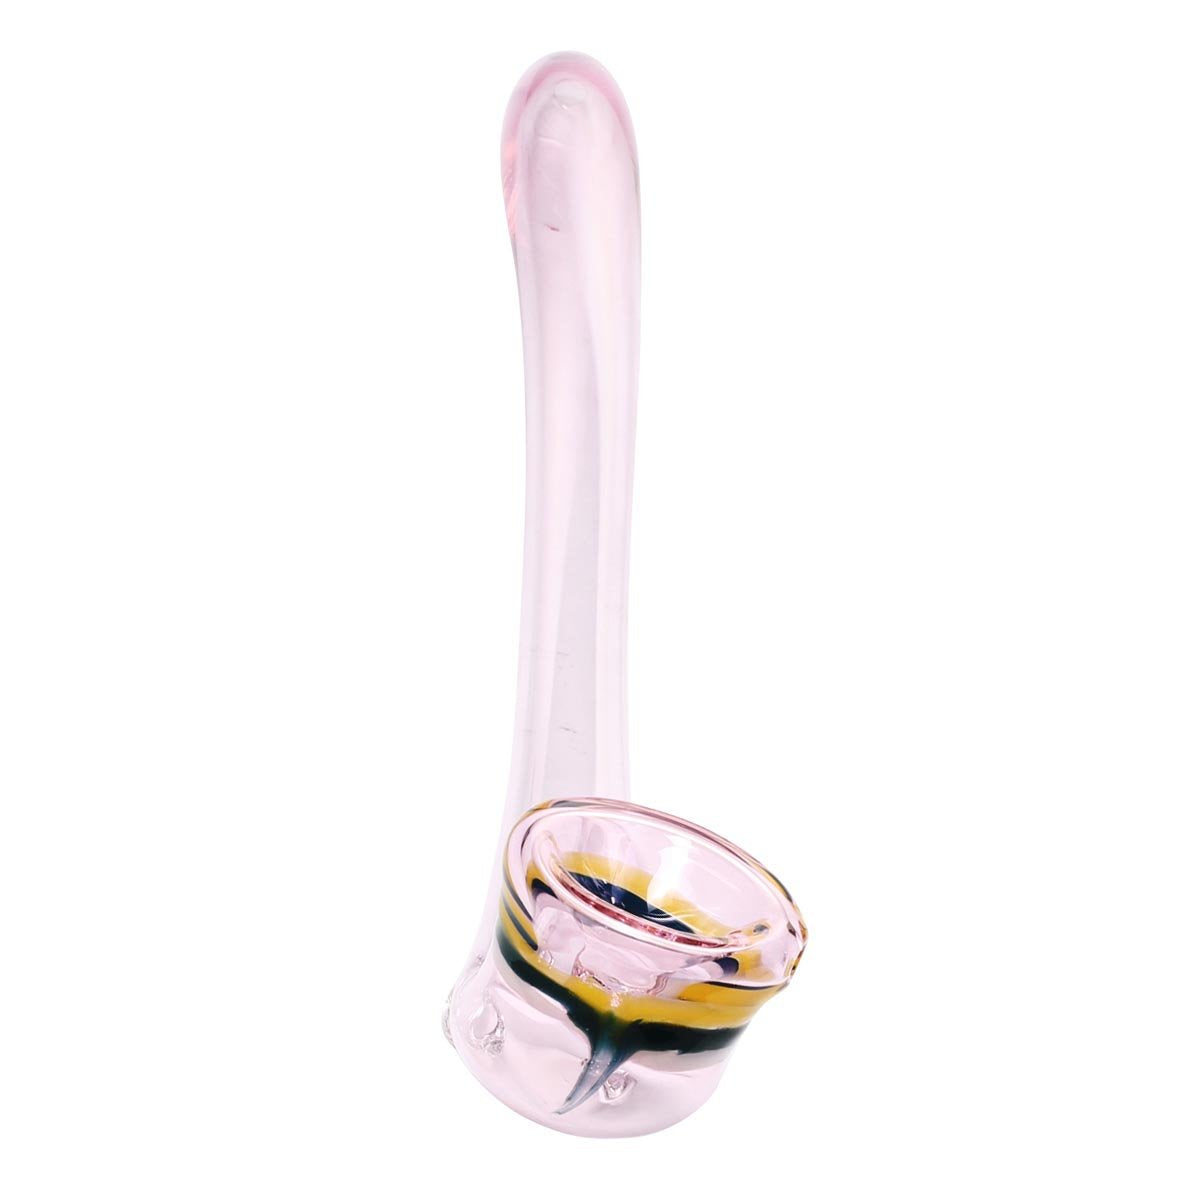 14 Gandolph Pipe - Pink Hand Pipes